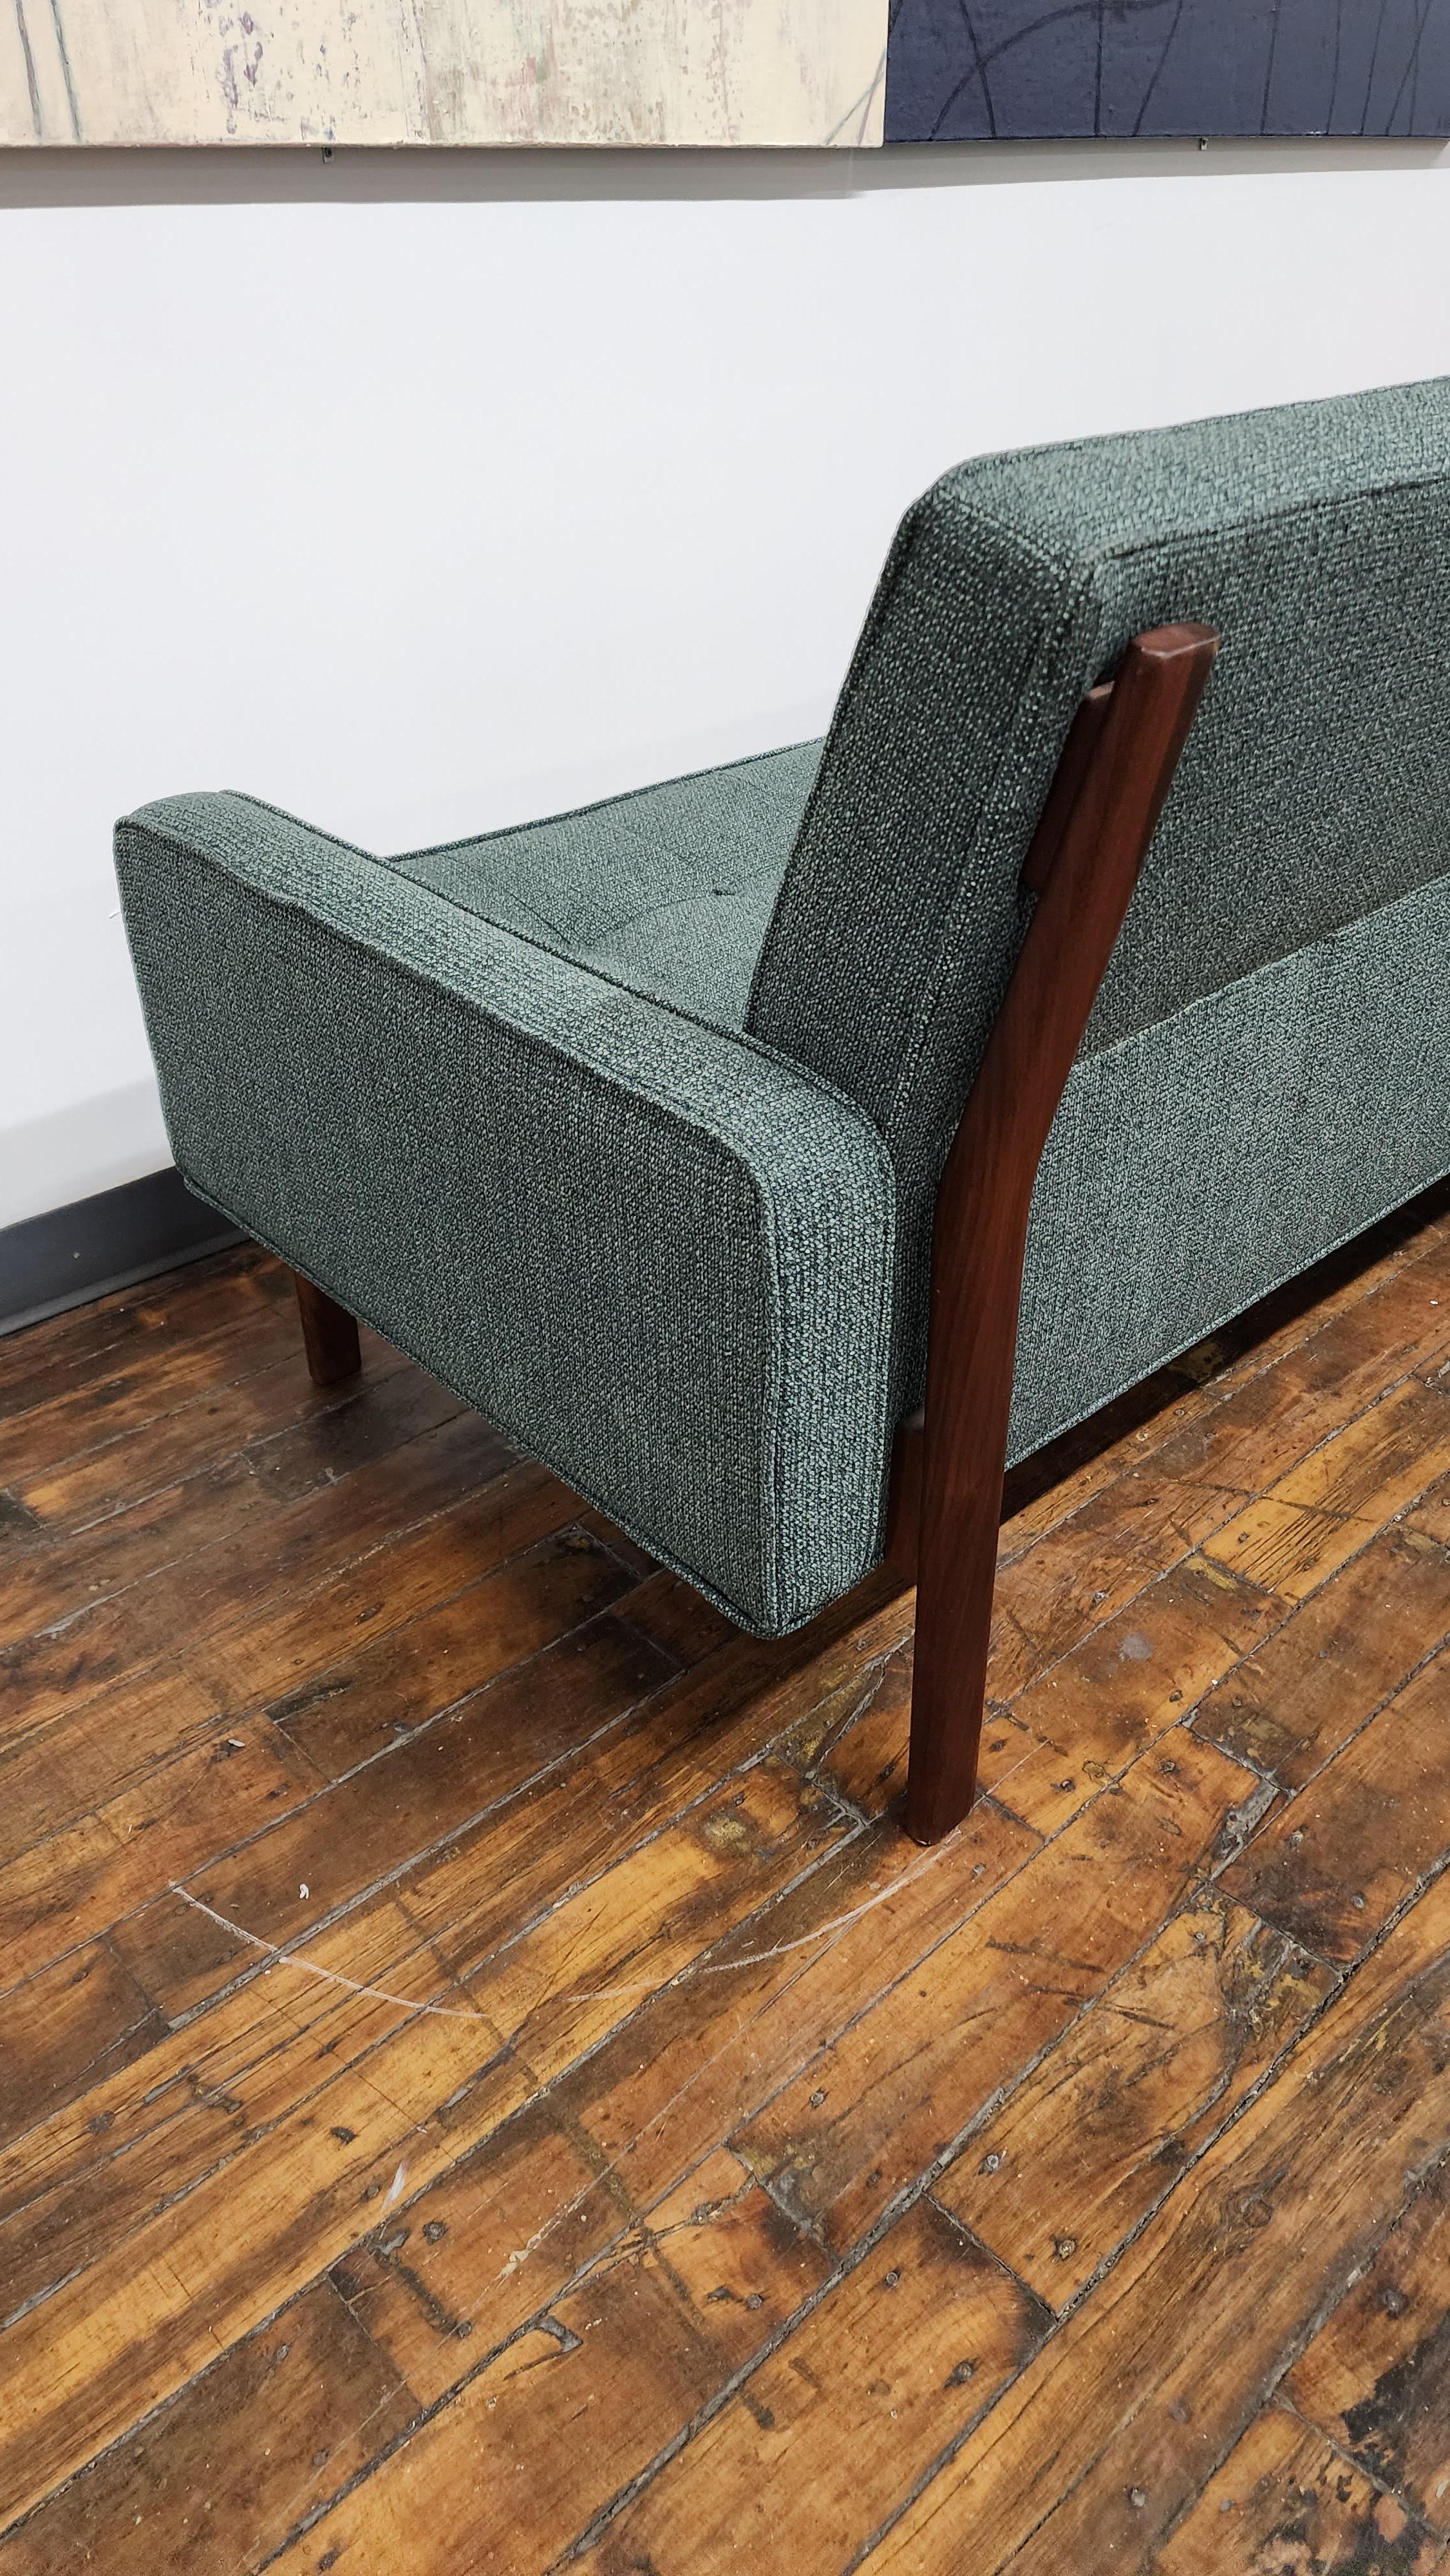 Vintage Walnut Frame Sofa by Jens Risom Designs. newly reupholstered with Maharam fabric. The exposed walnut back leg frame adds a beautiful accent against the green fabric. this classic design will look great in any style living space